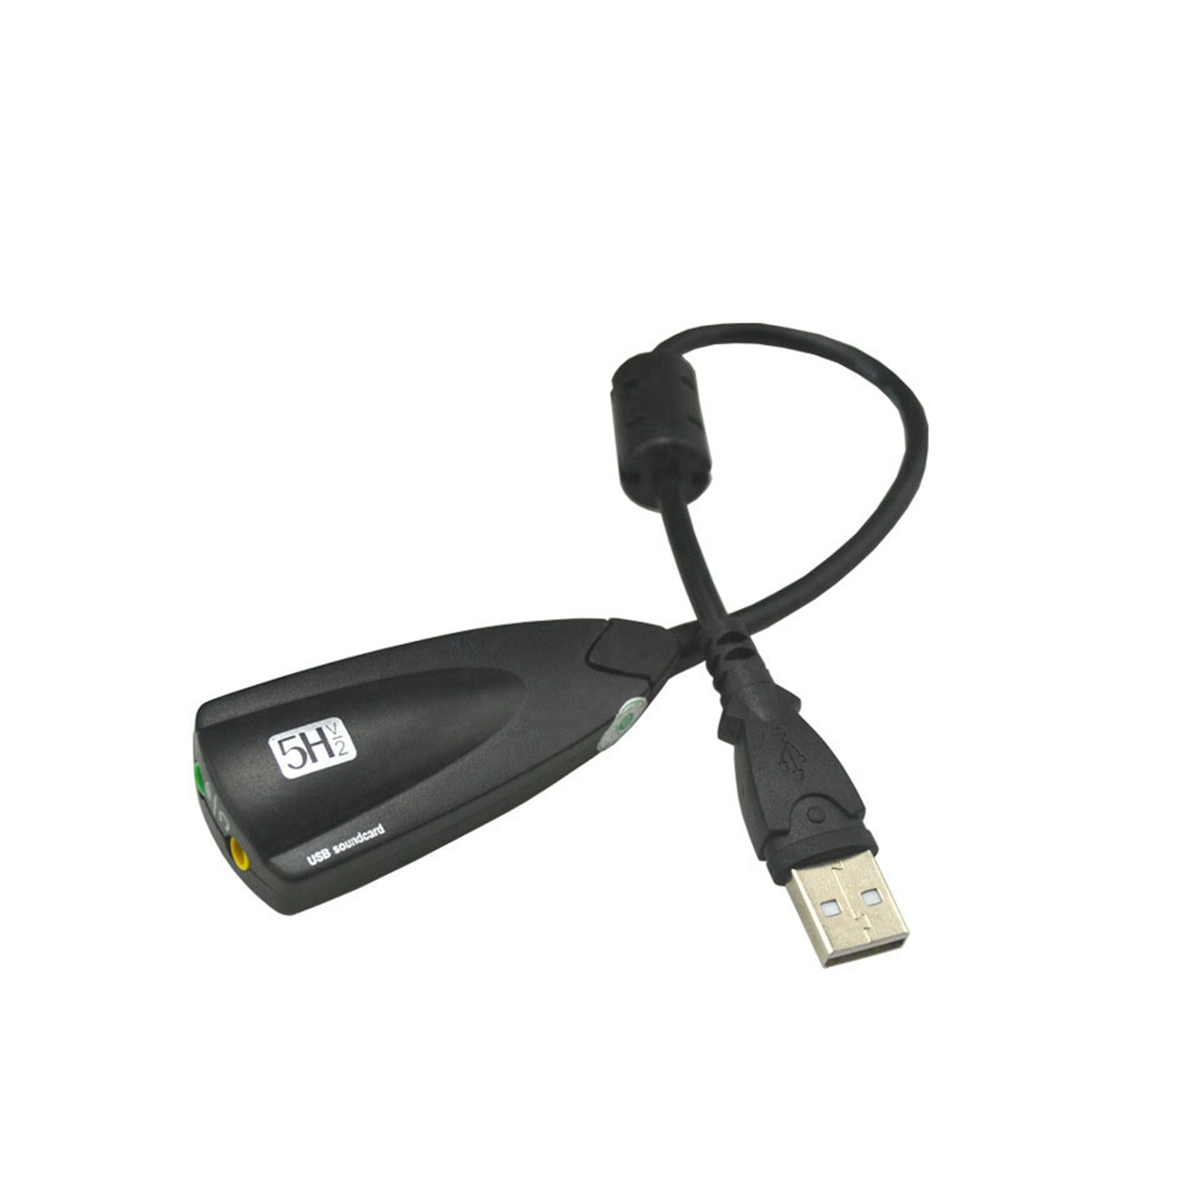 External USB Sound Card Wired Recording Sound Card 3.5mm for Laptop PC